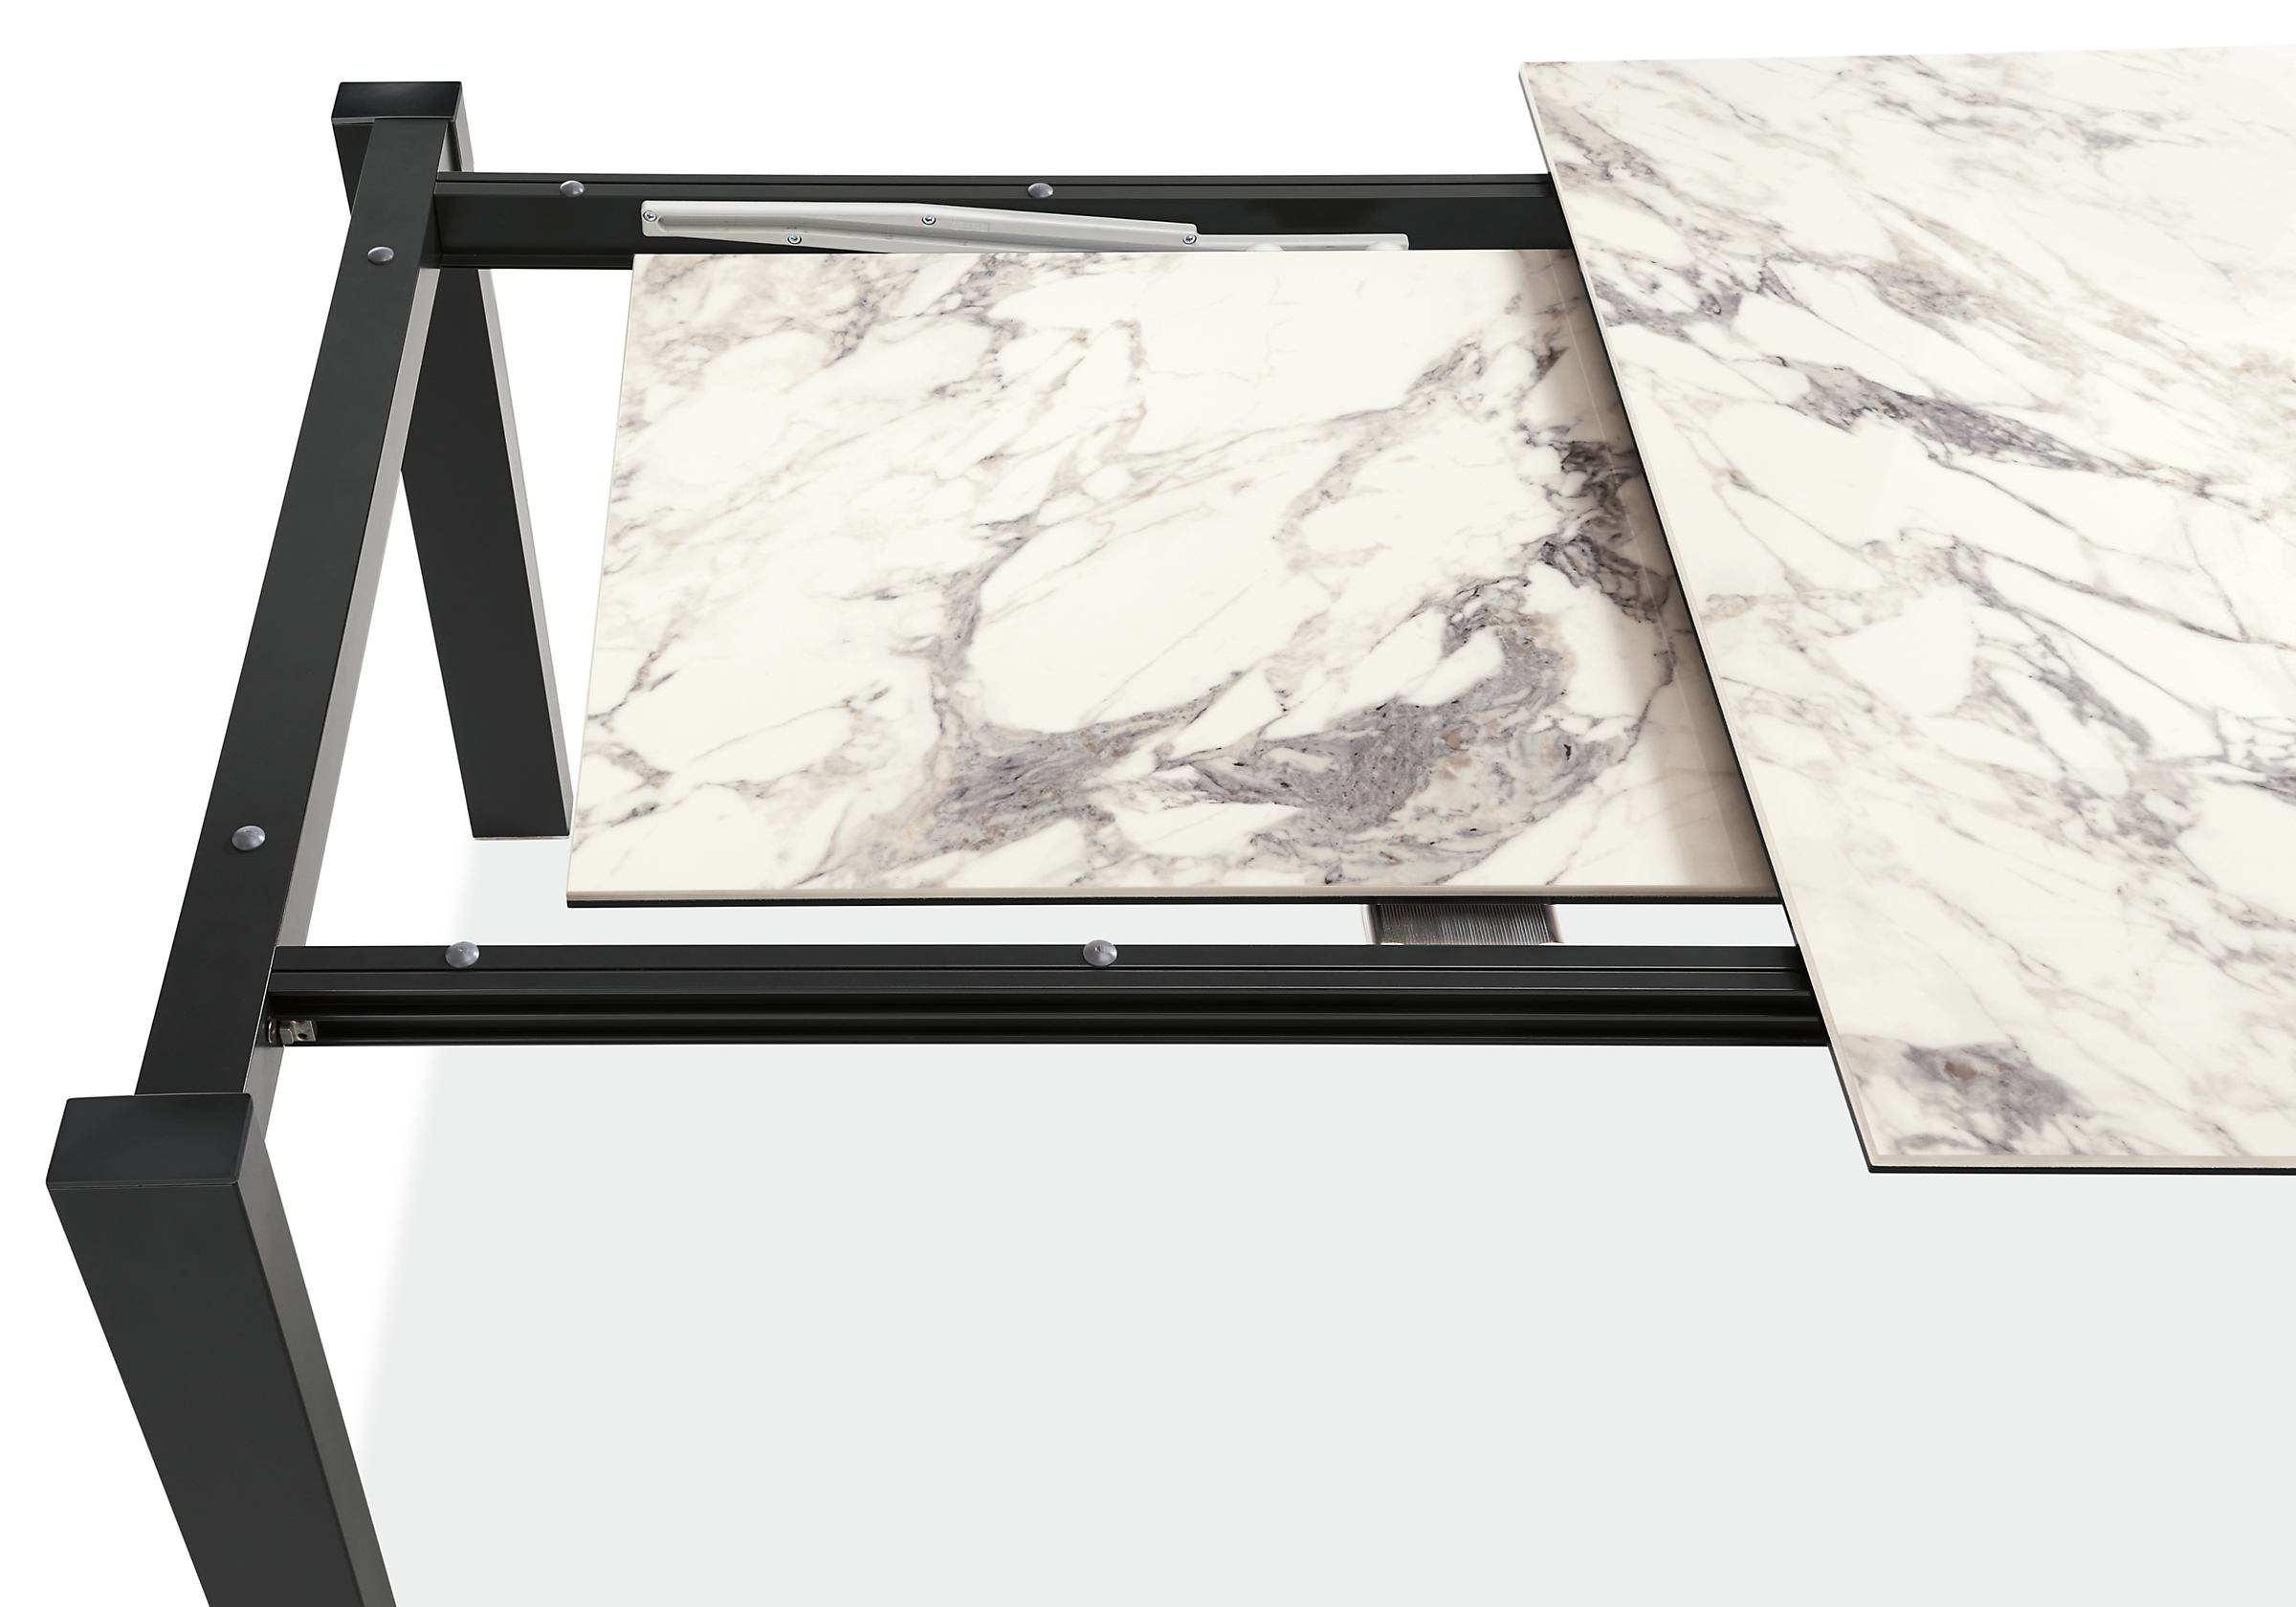 detail of metric extension table with marbled bright white ceramic top, with leaf exposed.